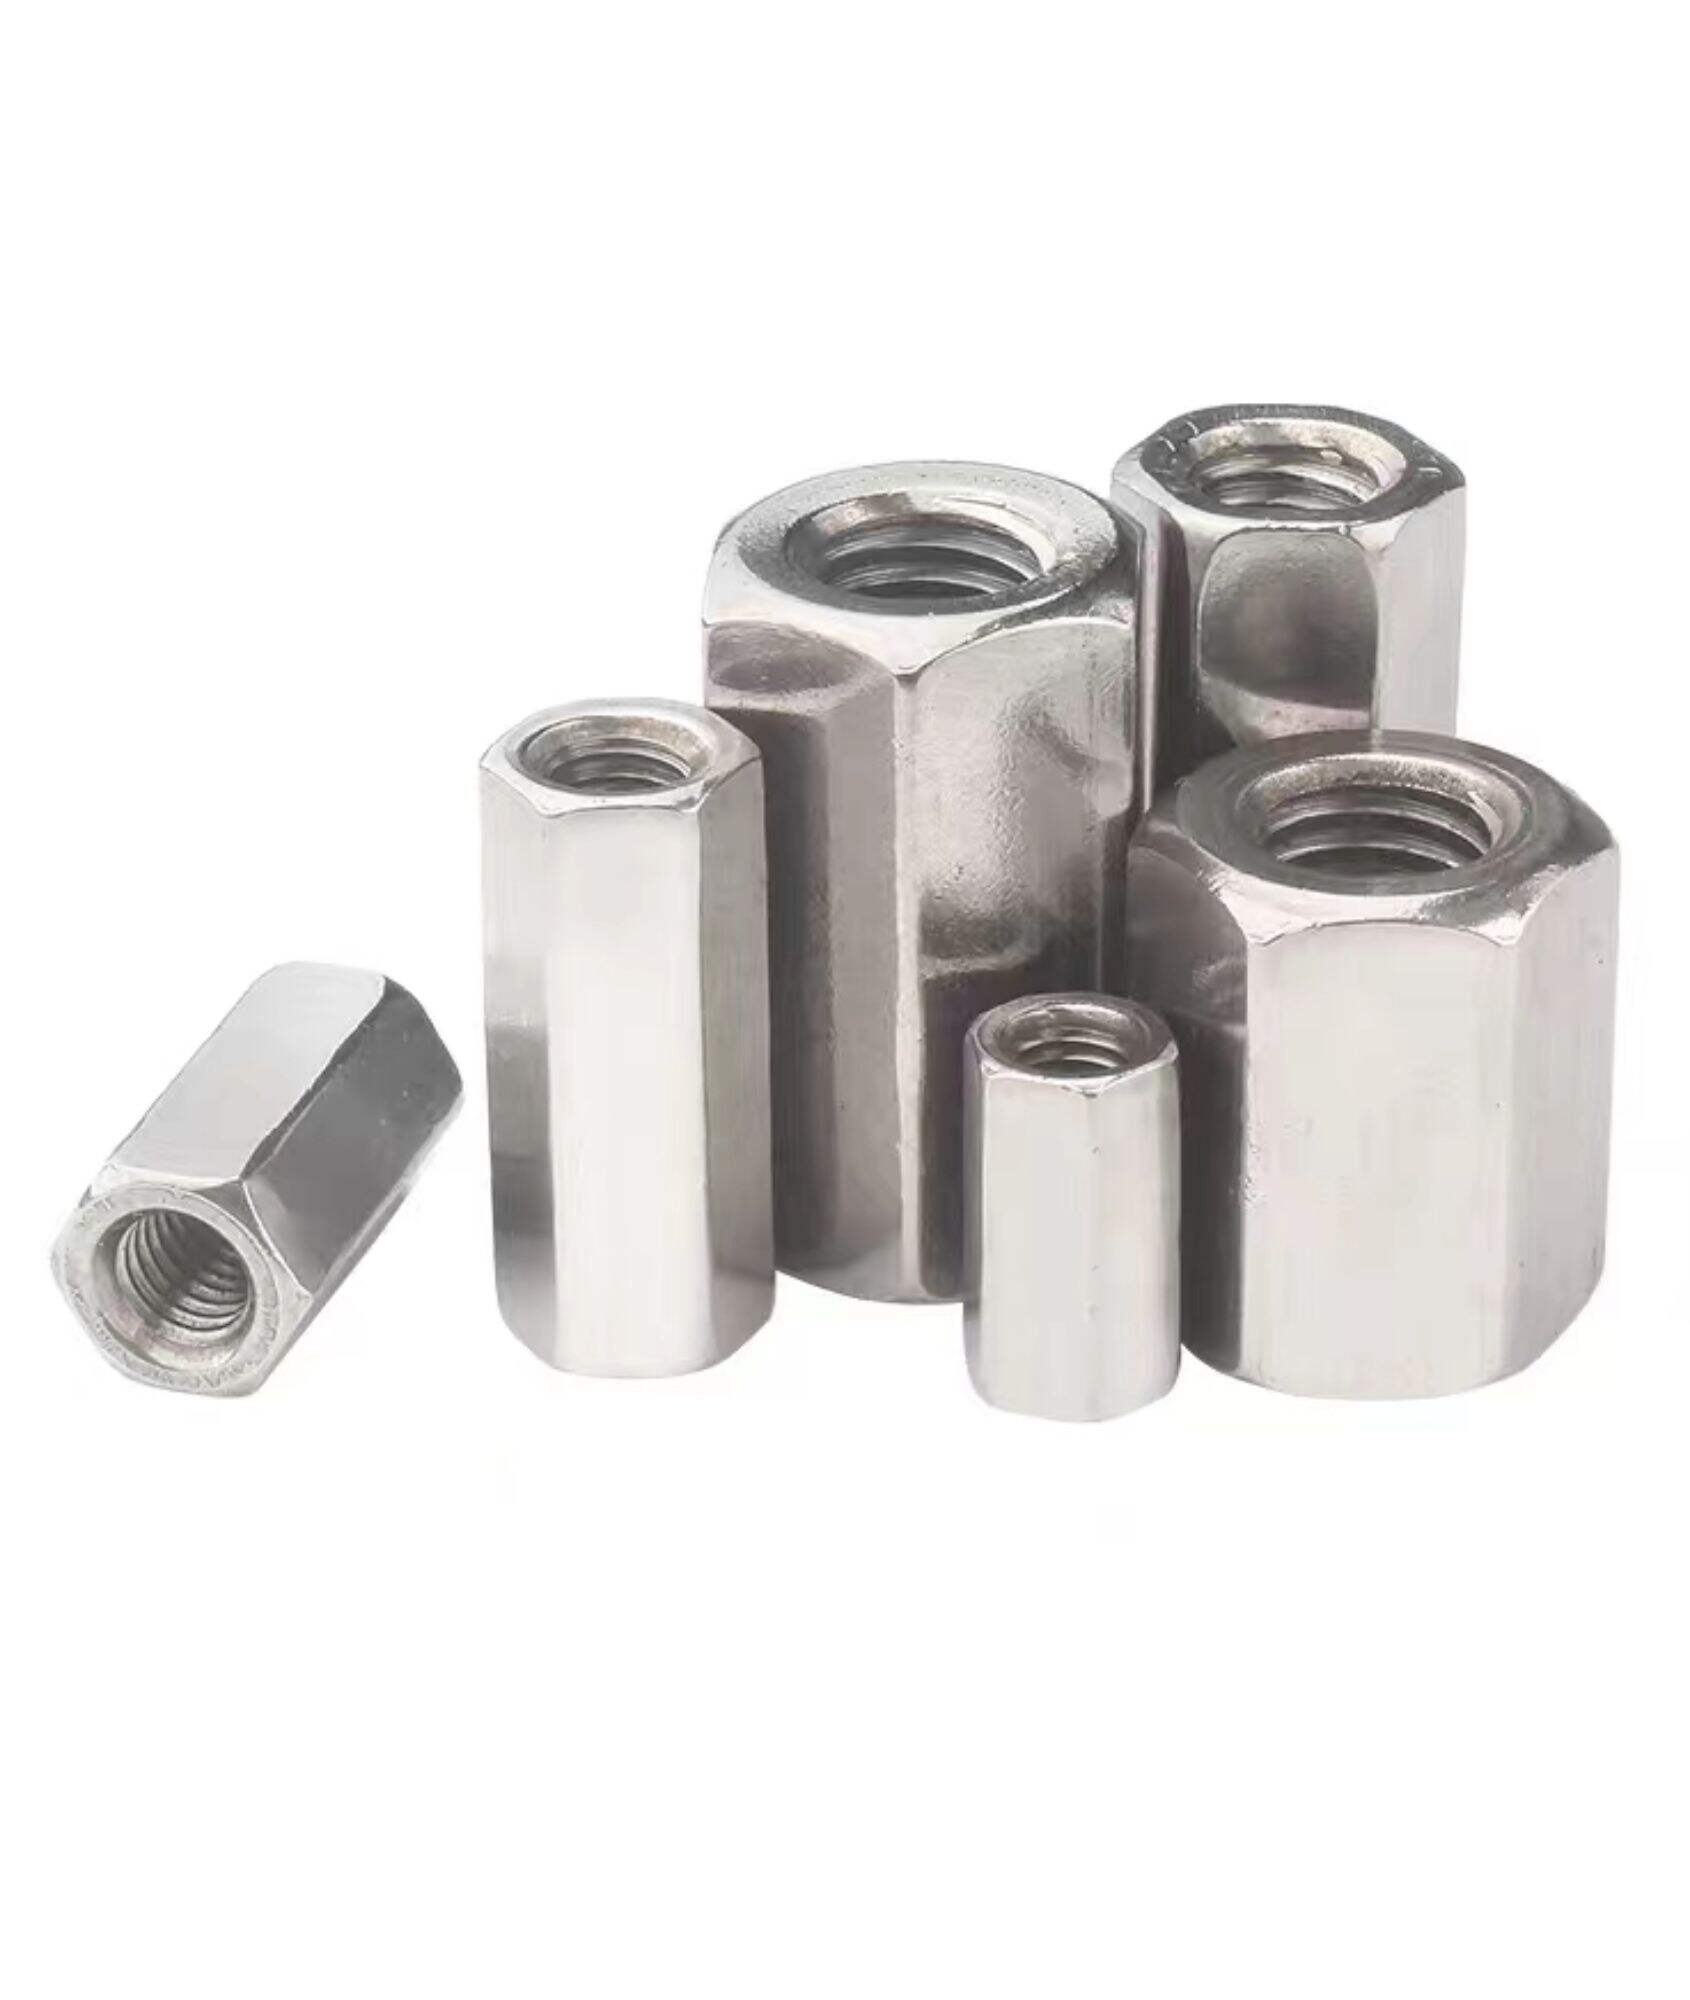 Stainless steel Din6334 Long Nut Hex Nuts 